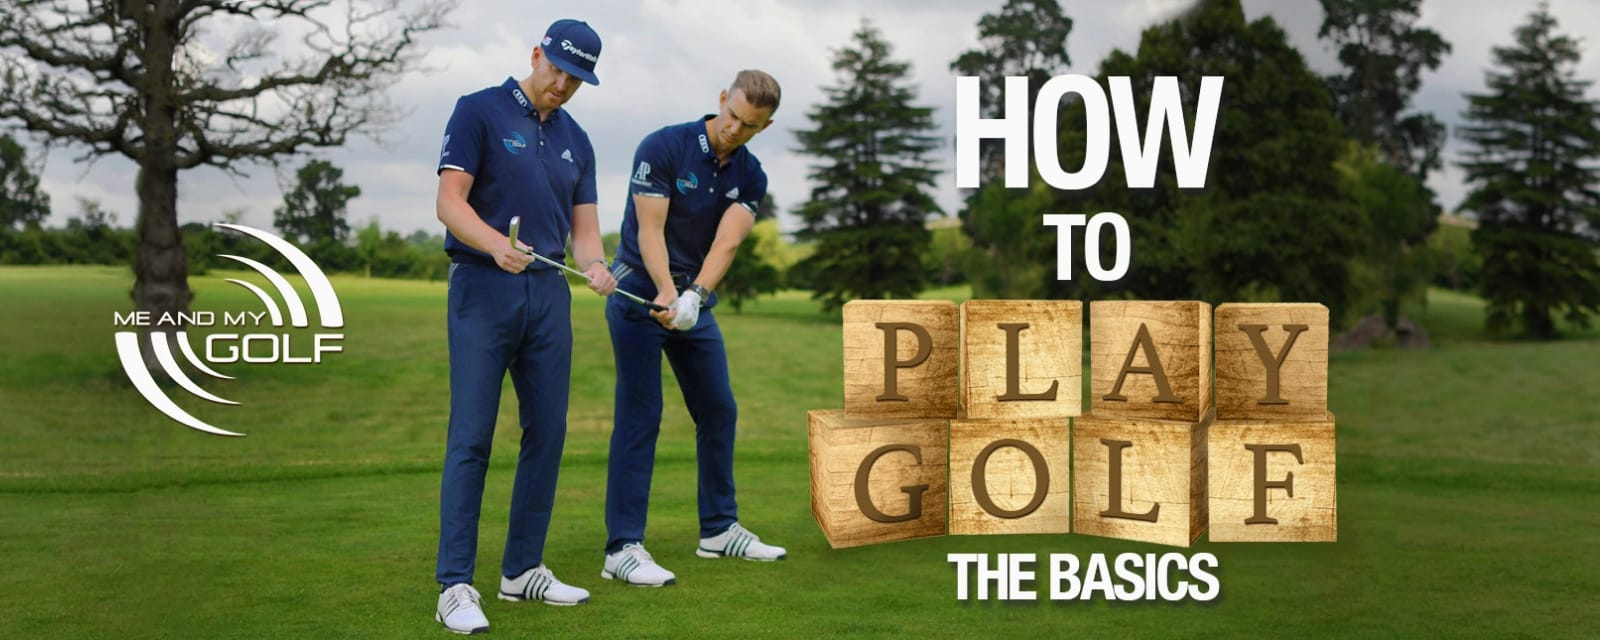 How To Play Golf Level 1 - The Basics